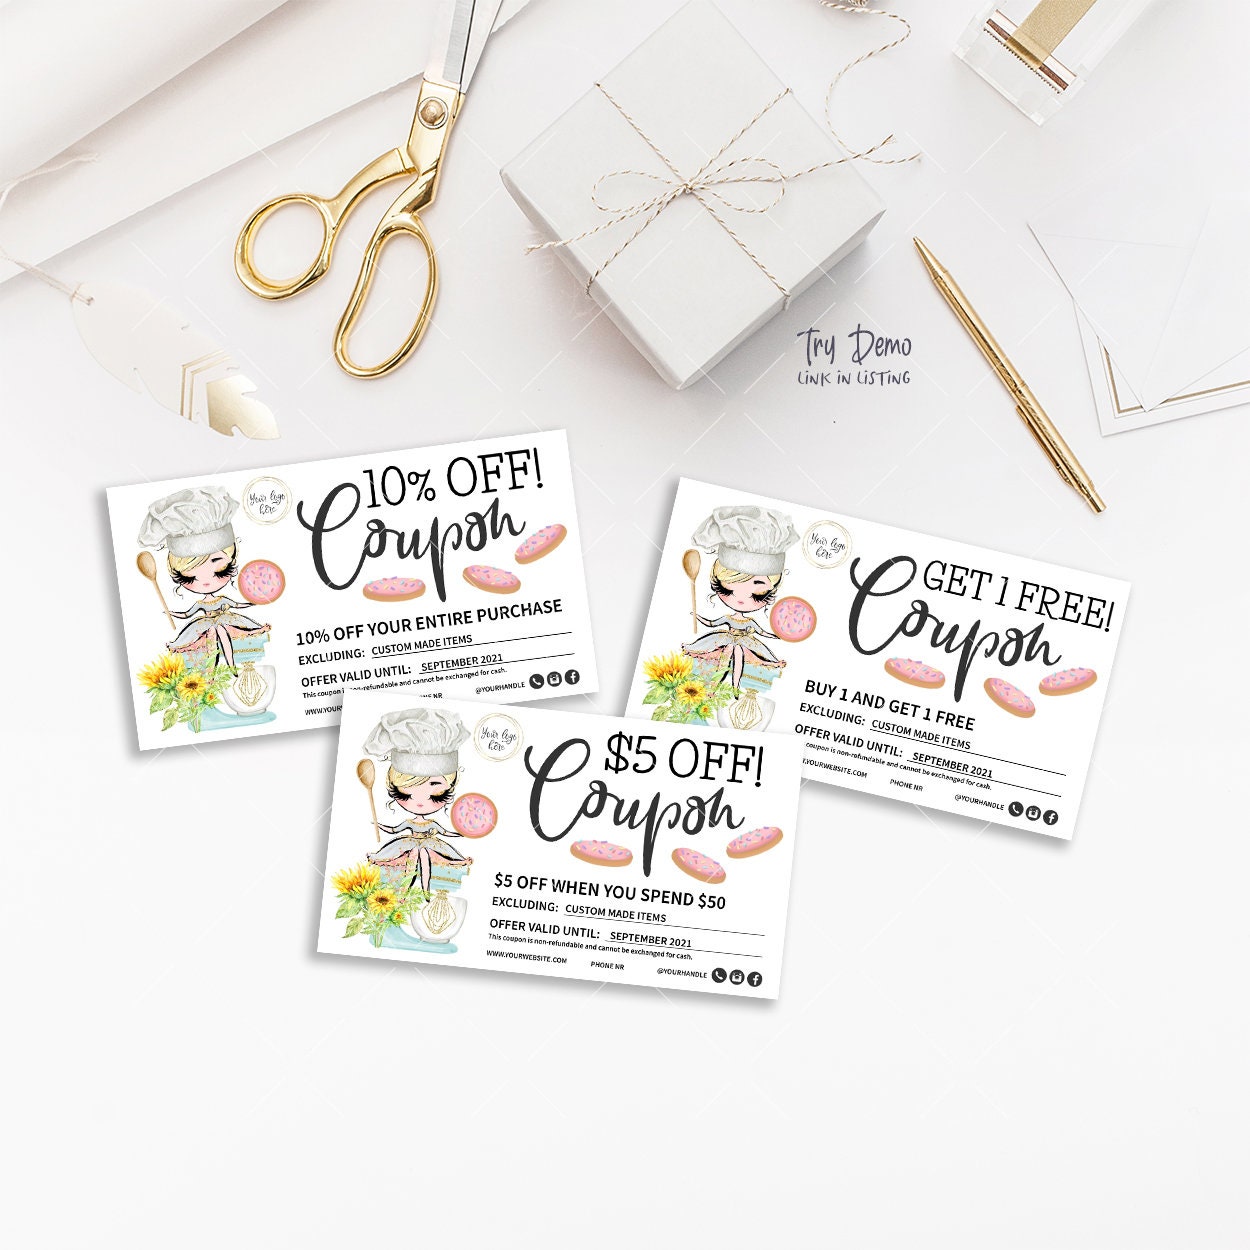 Bakery Gift Coupons, Sugar Cookies, Chef